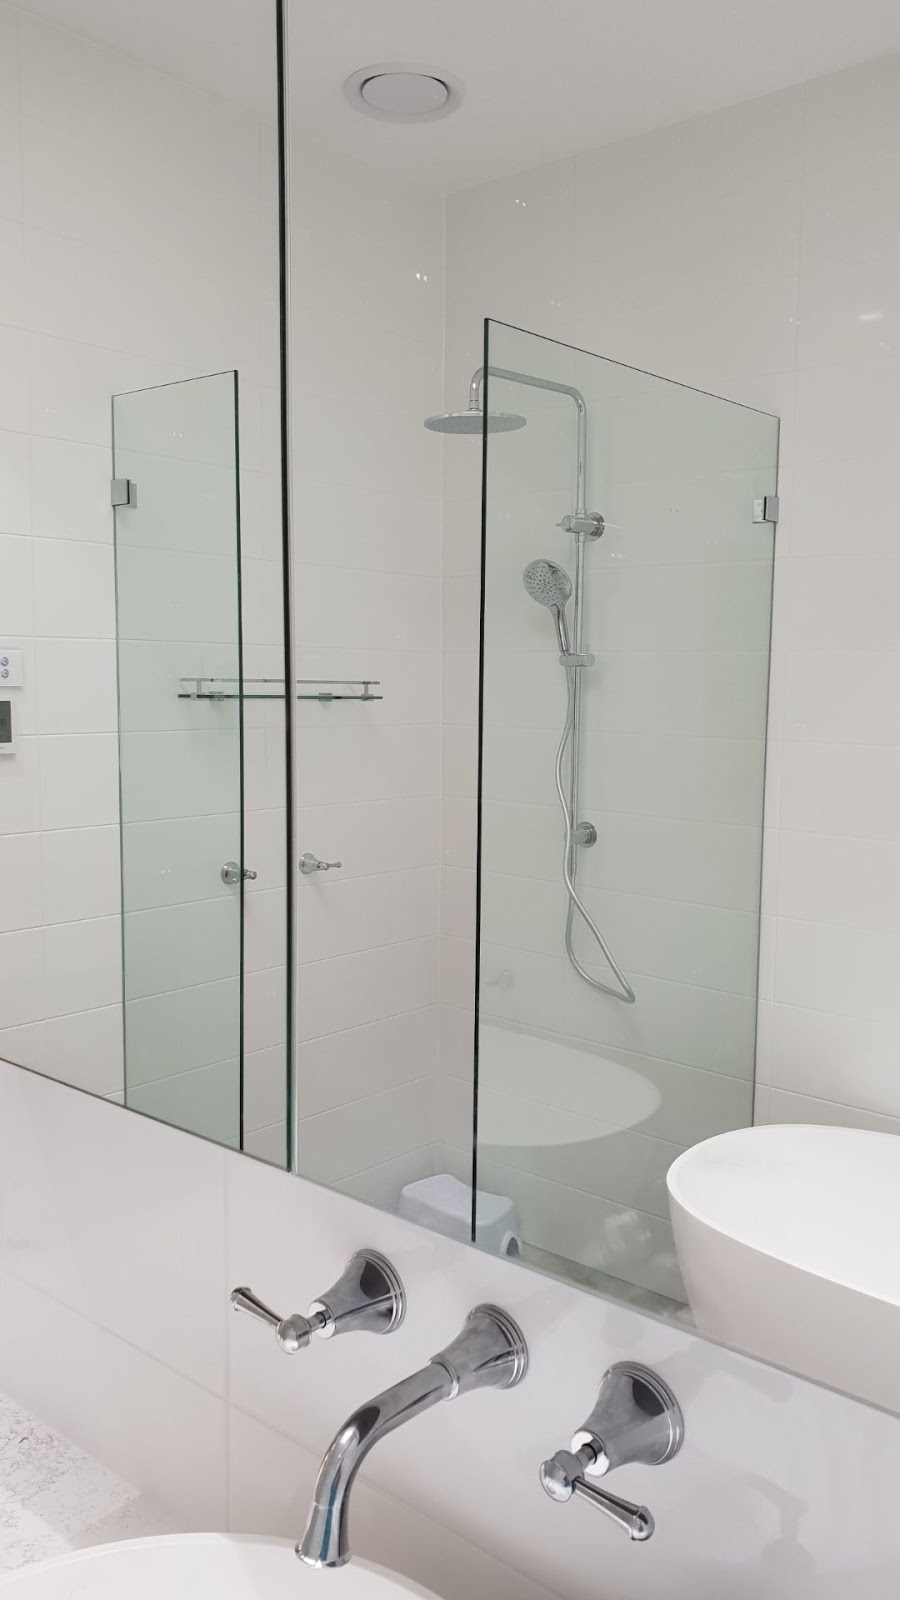 Frameless glass showers & pool fencing | Ilford Ave, Buttaba NSW 2283, Australia | Phone: 0414 532 616